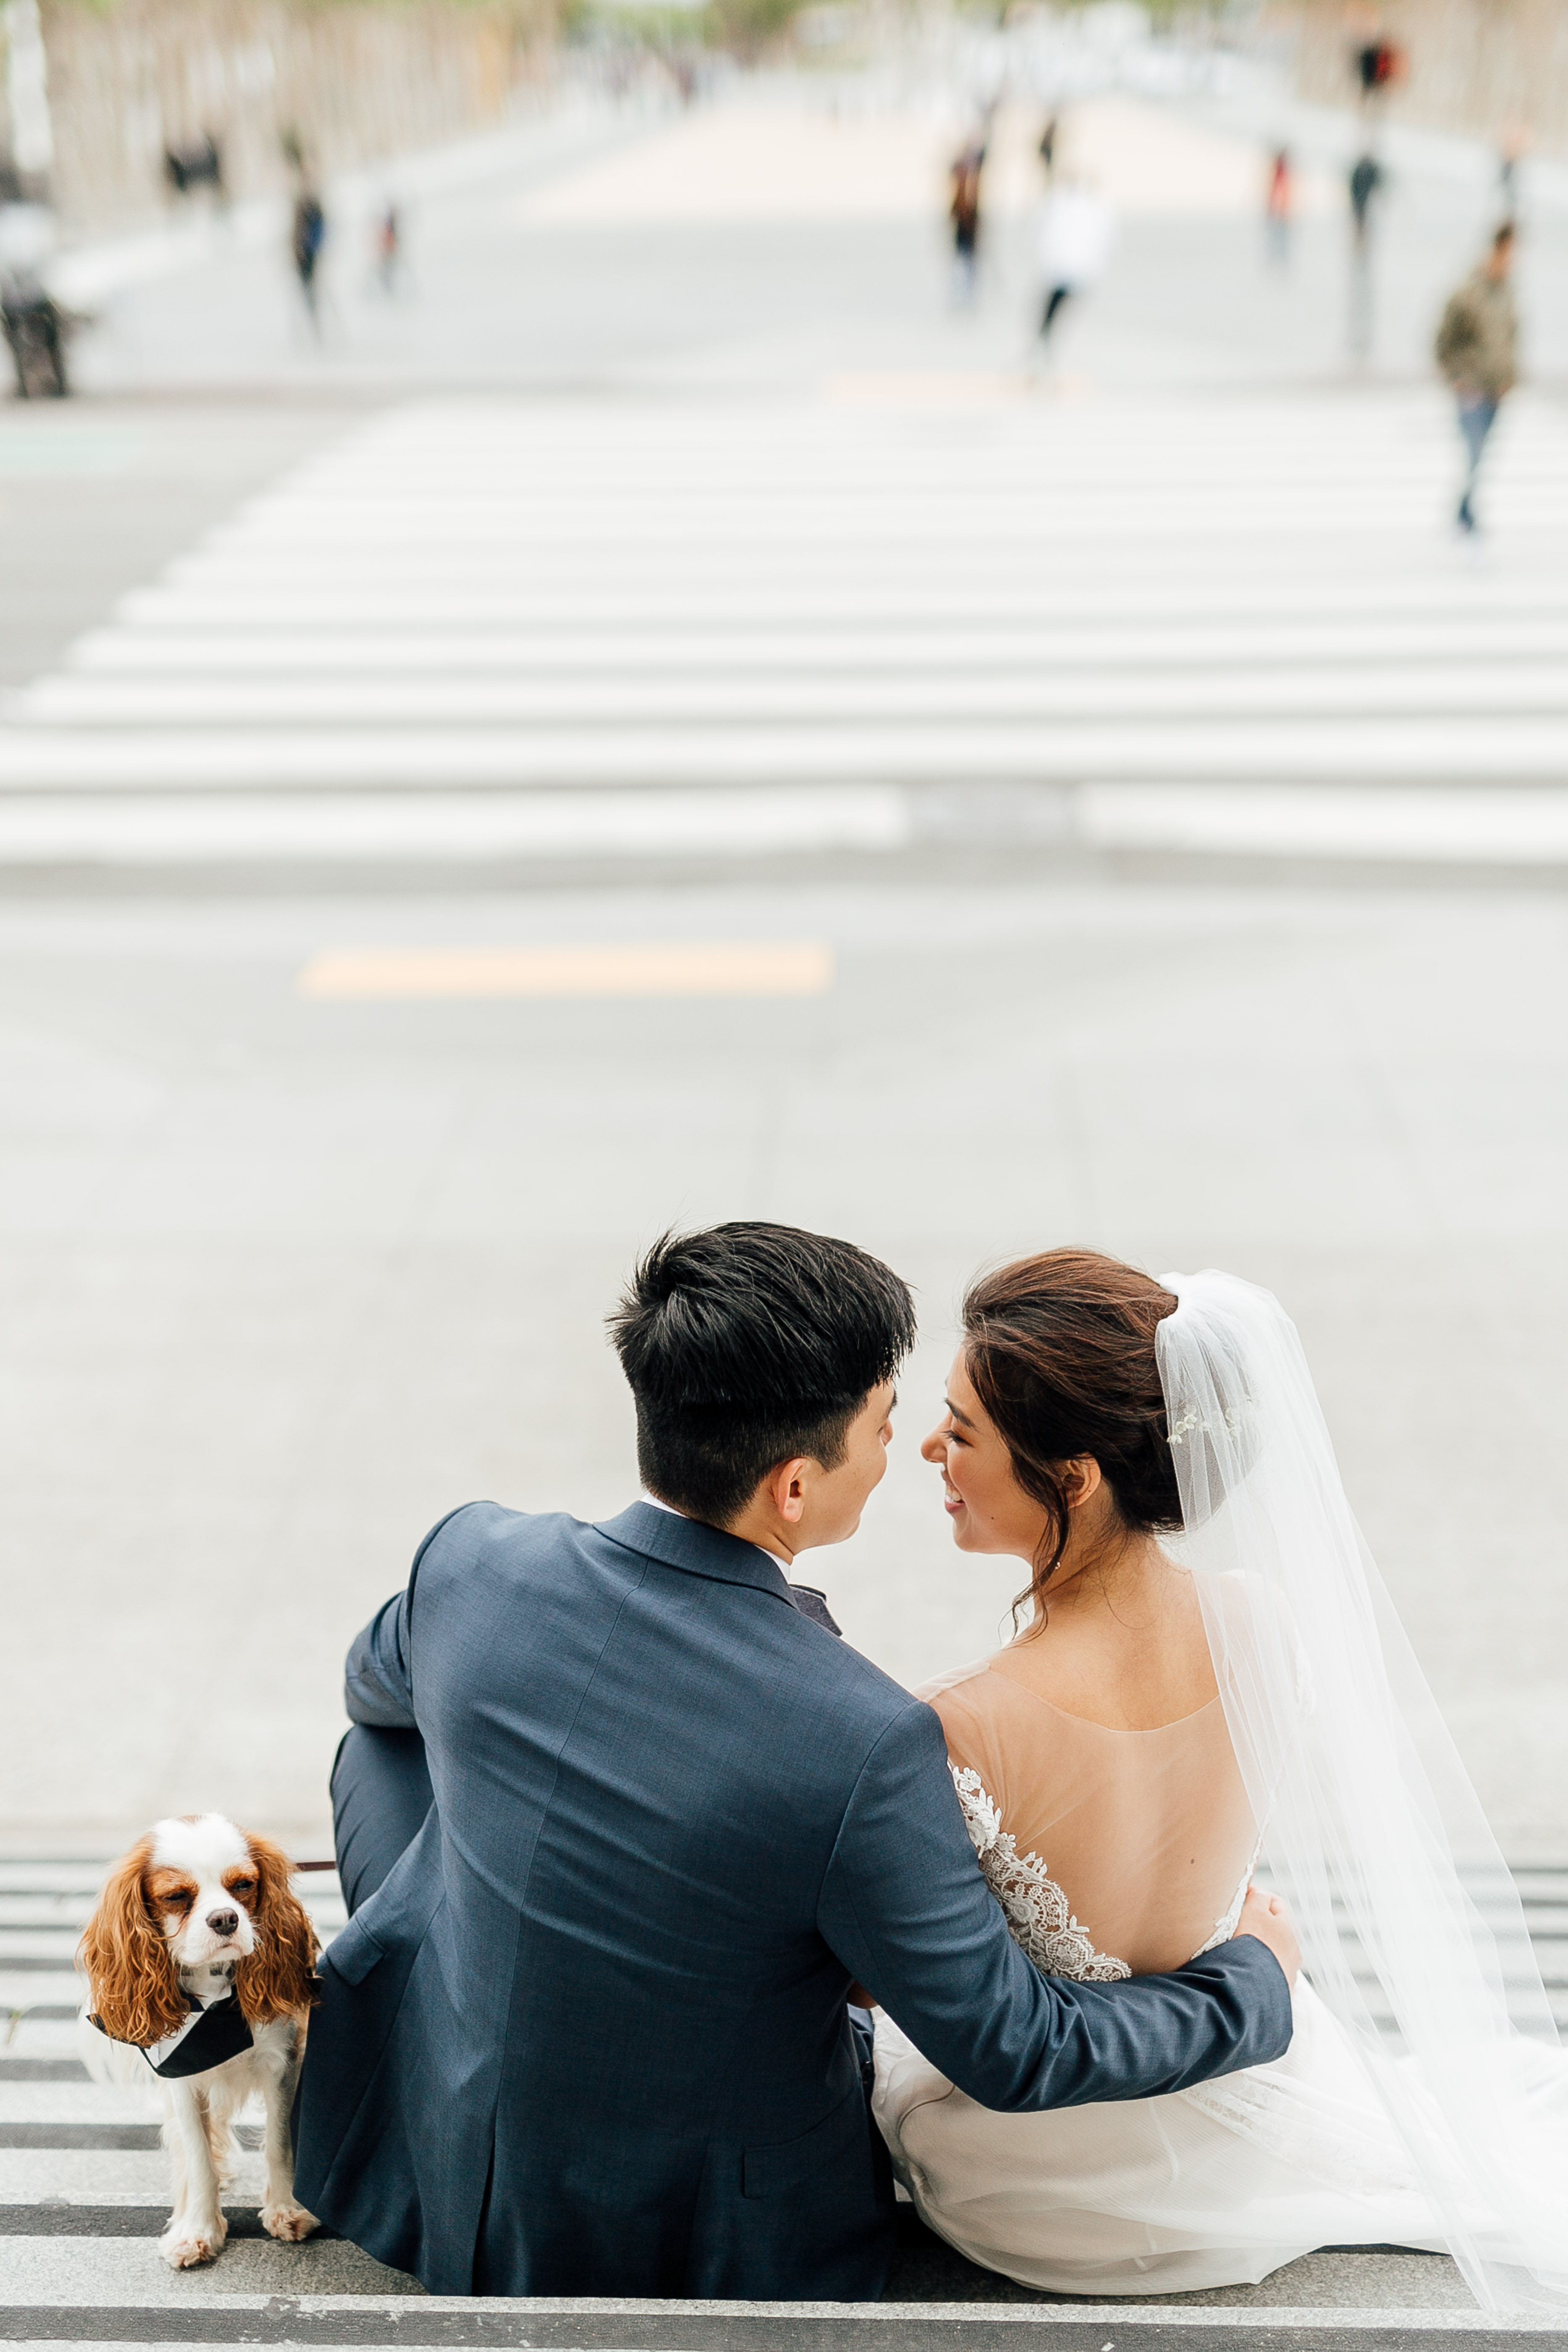 Bride and groom lean in for kiss on steps, dog looks at camera